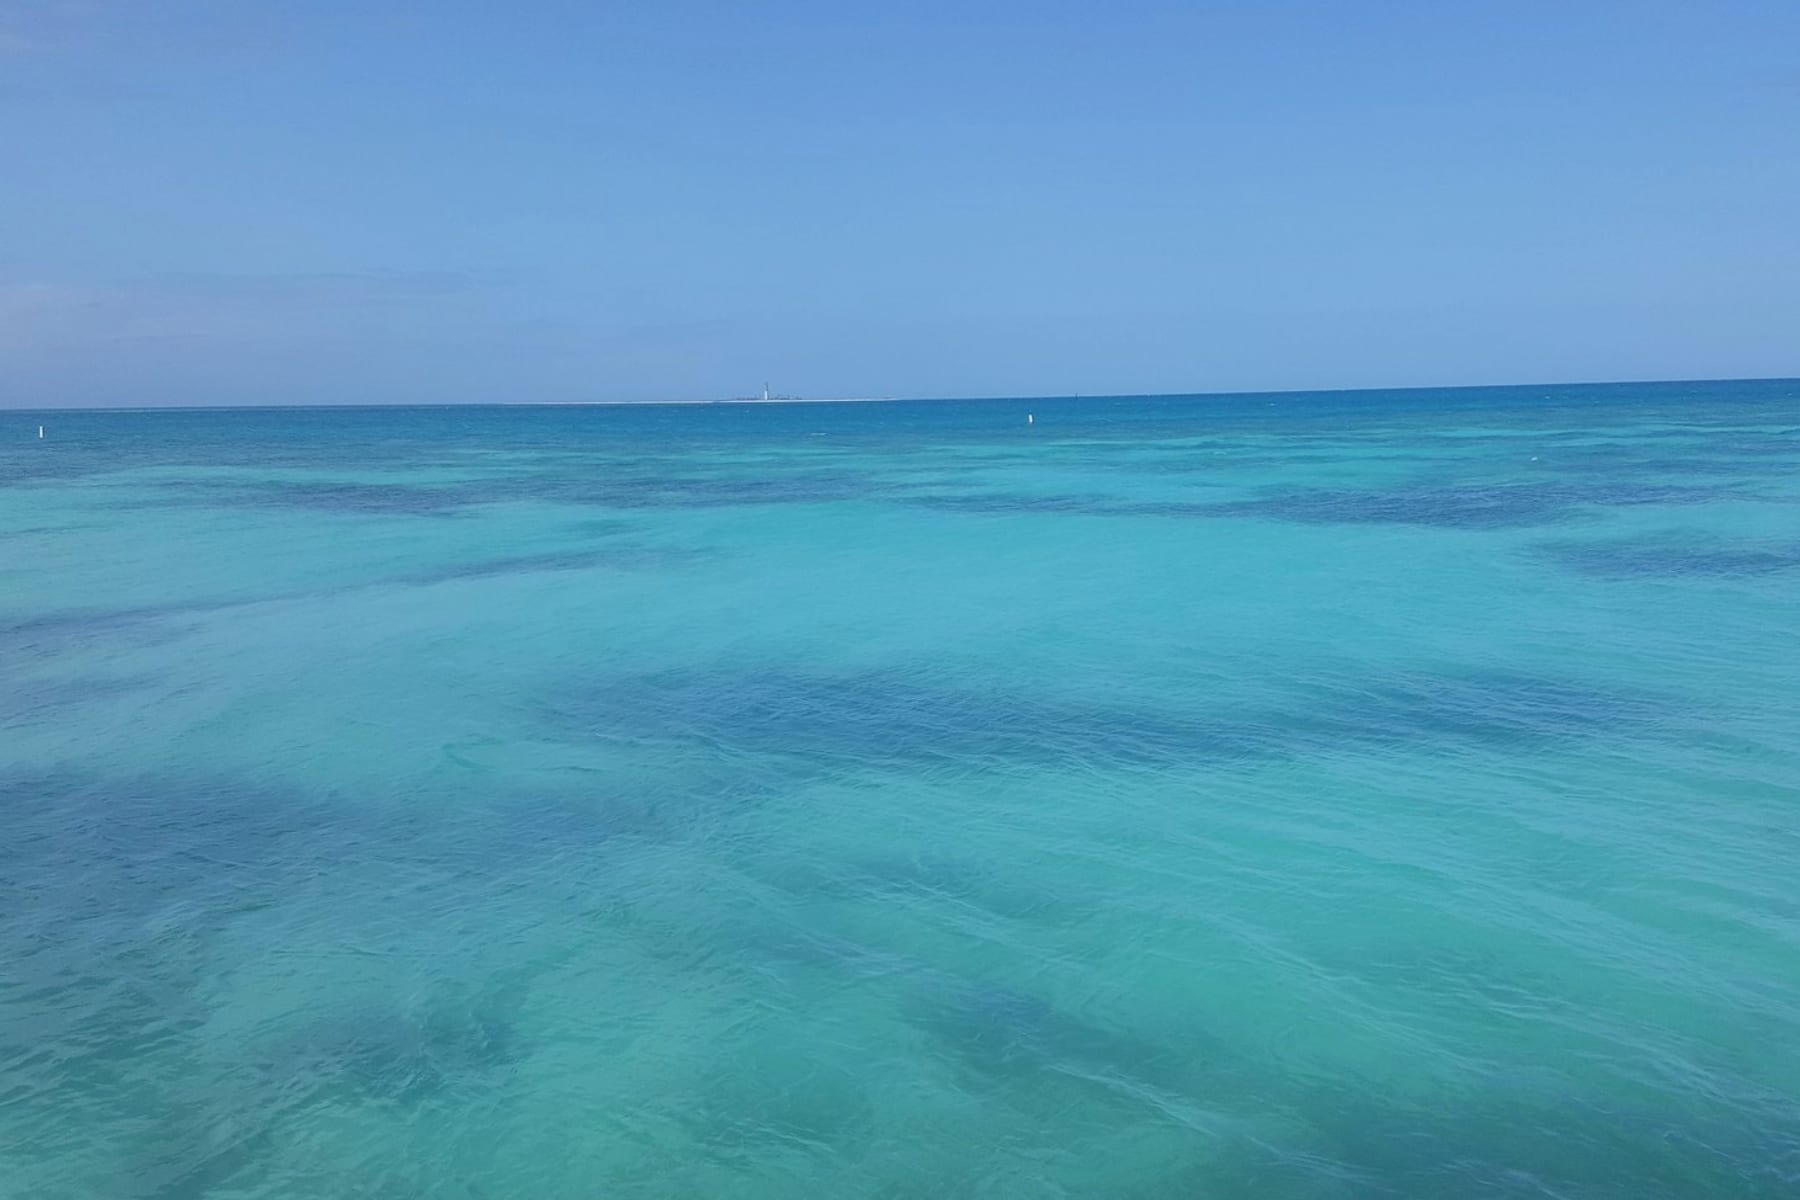 Turquoise water of Dry Tortugas National Park with a lighthouse in the far distance.